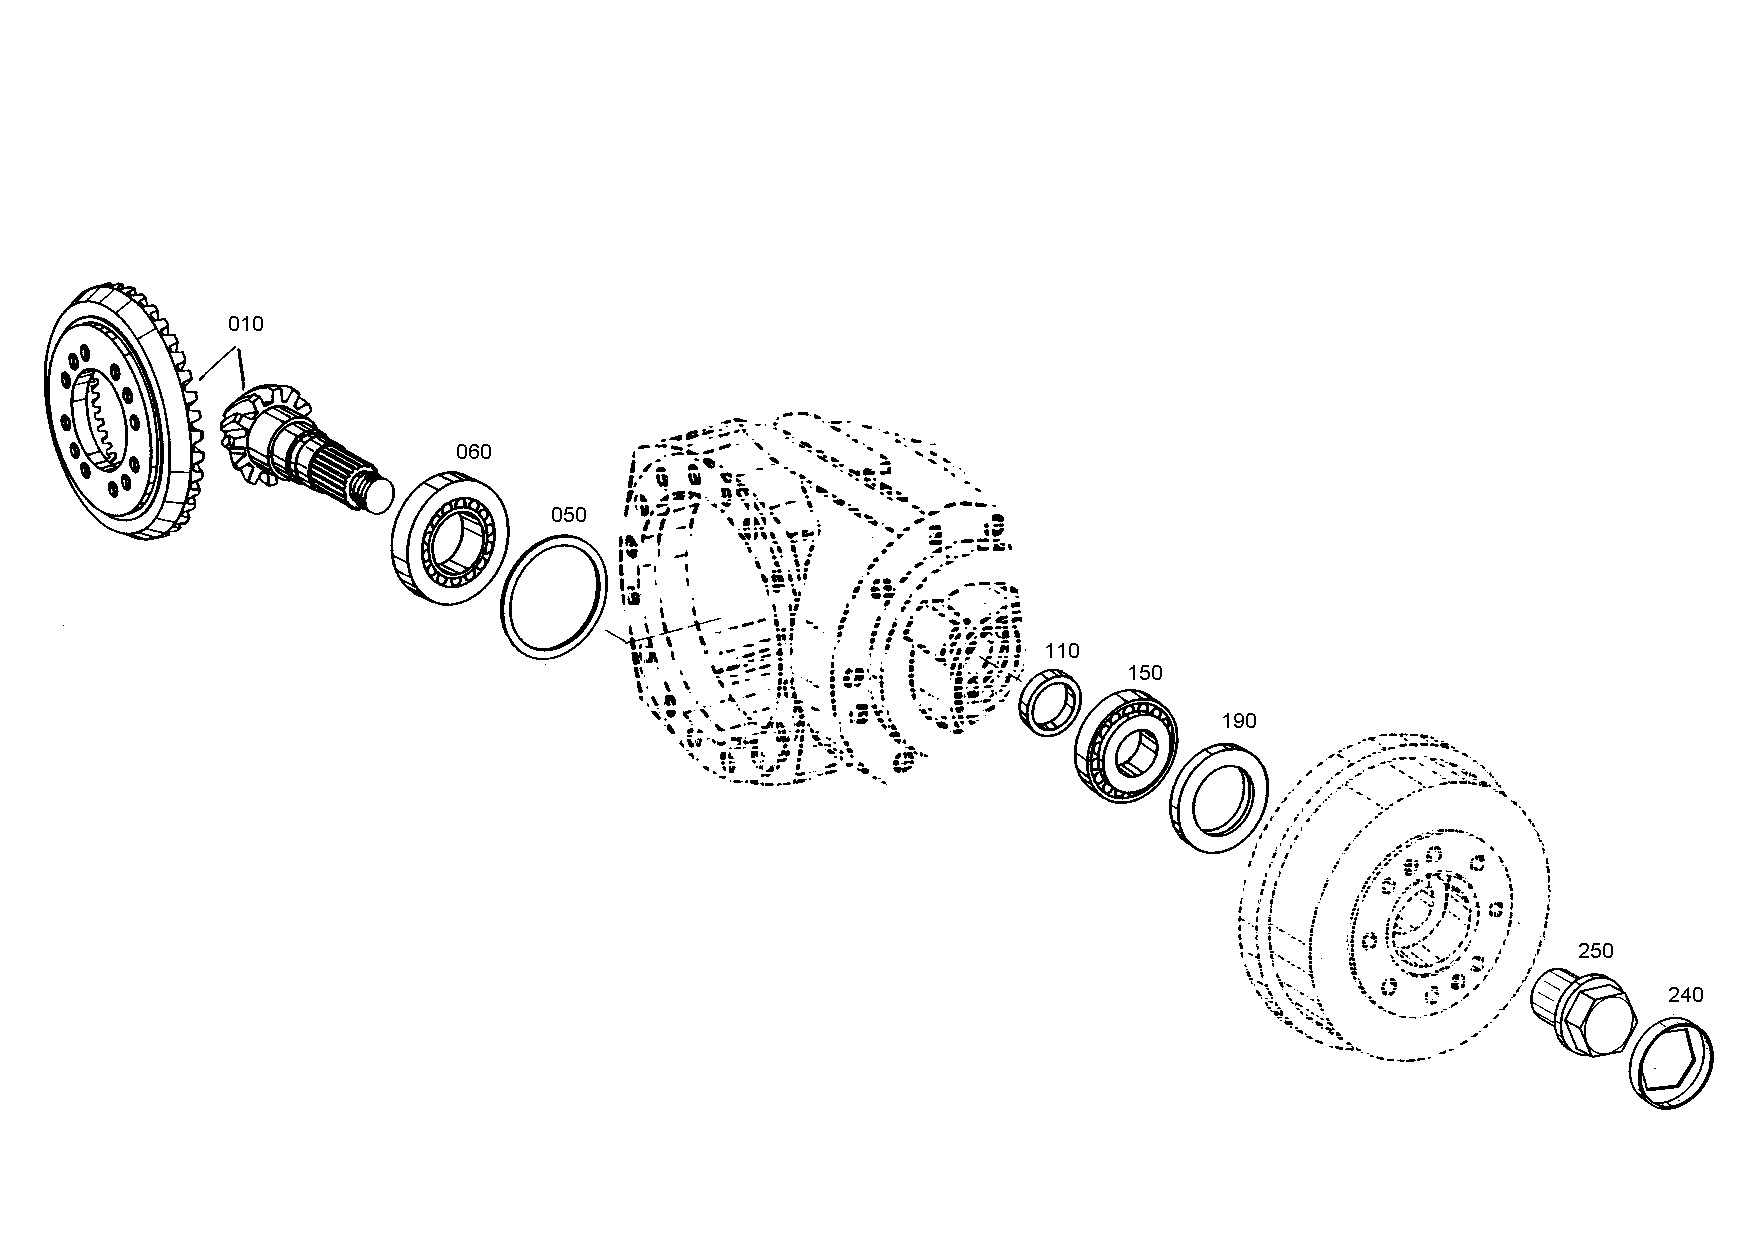 drawing for LIEBHERR GMBH 7619981 - HOLLOW/UNION SCREW